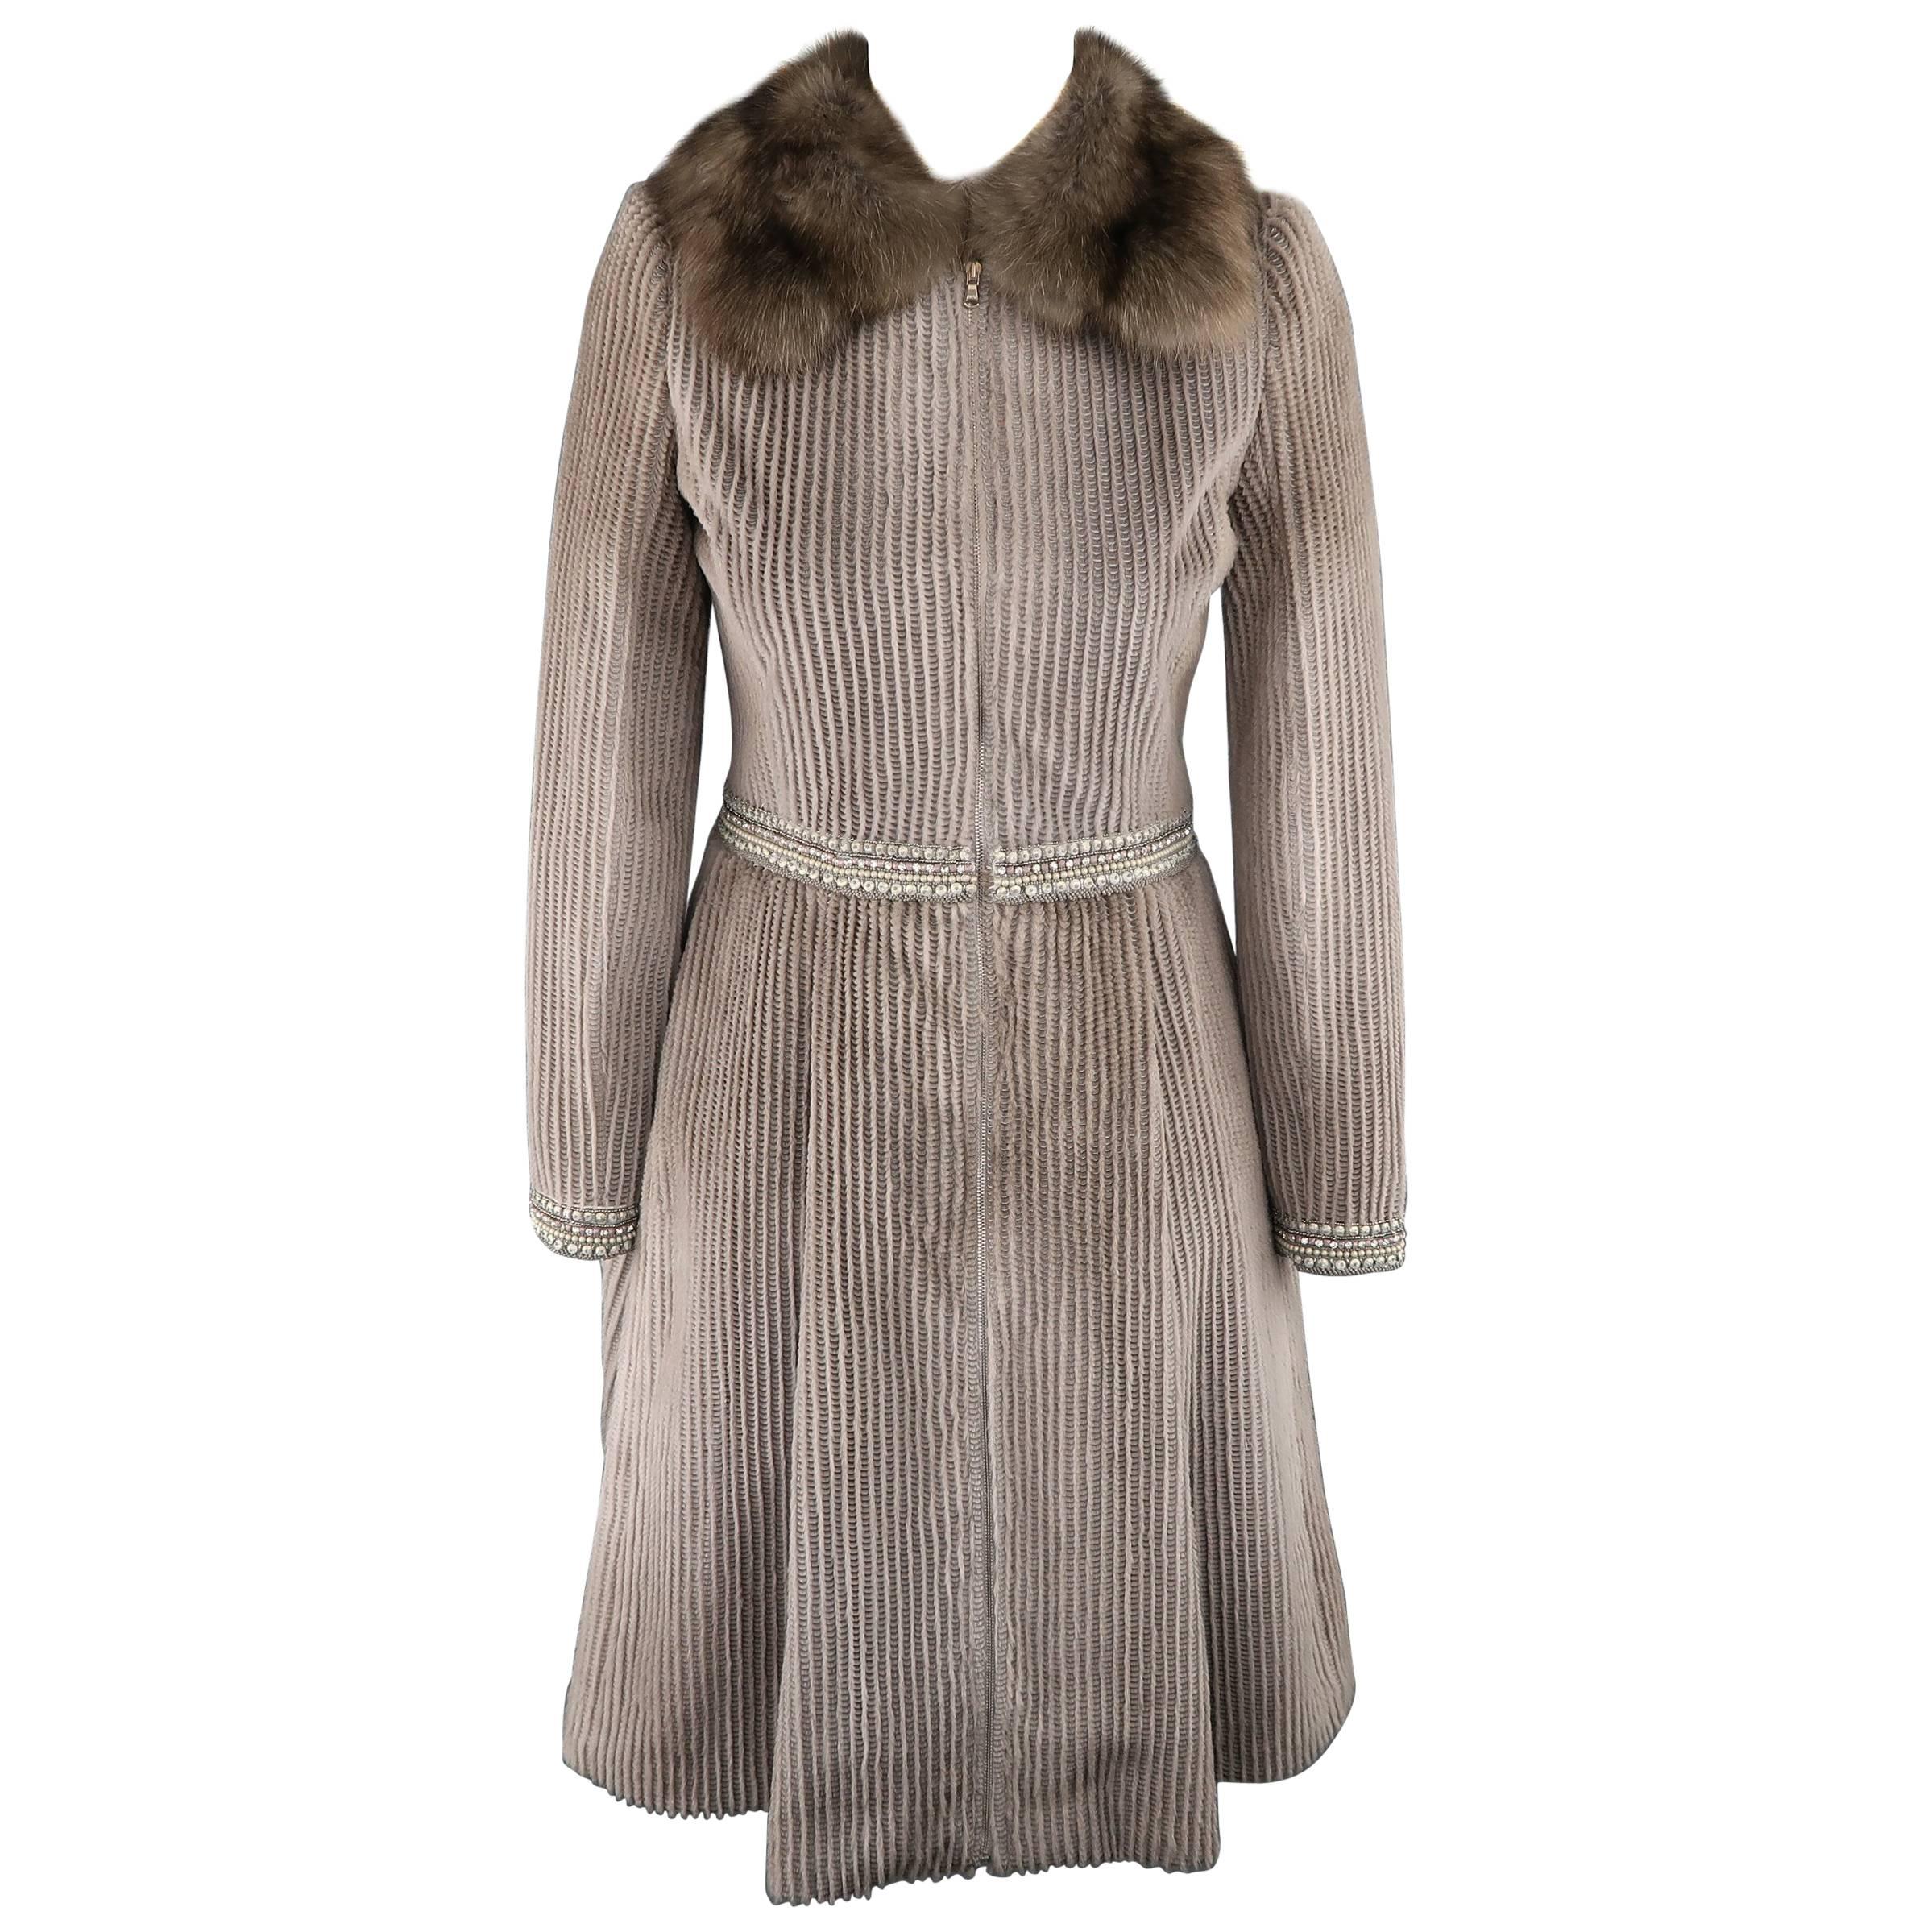 Dennis Basso Taupe Perforated Mink Sable Collar Pleated Skirt Cocktail Dress